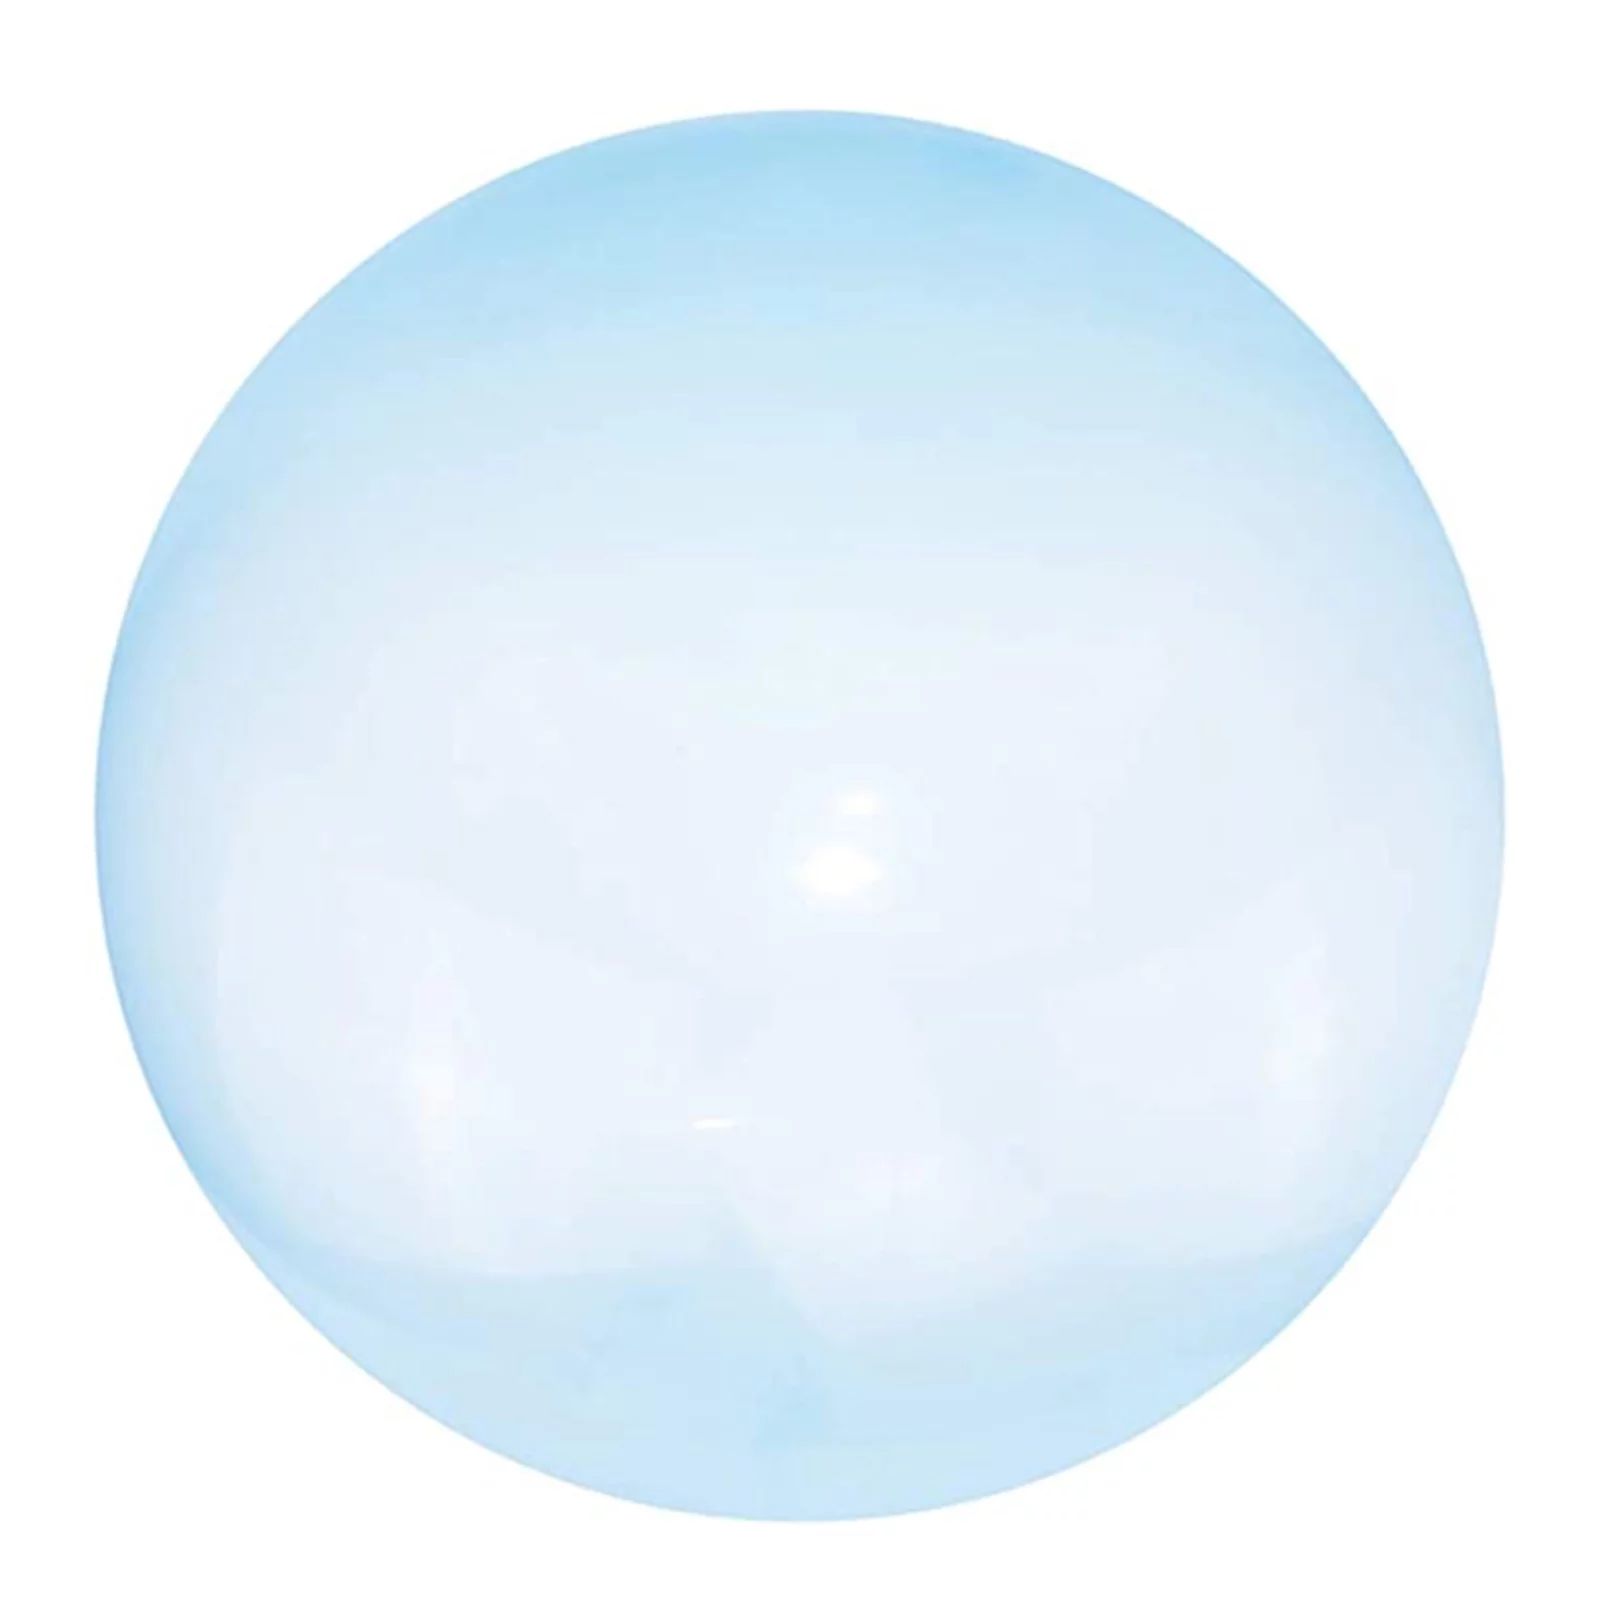 TPR children's toy bouncy ball oversized inflatable ball water injection bubble ball blue 40-50CM | Walmart (US)